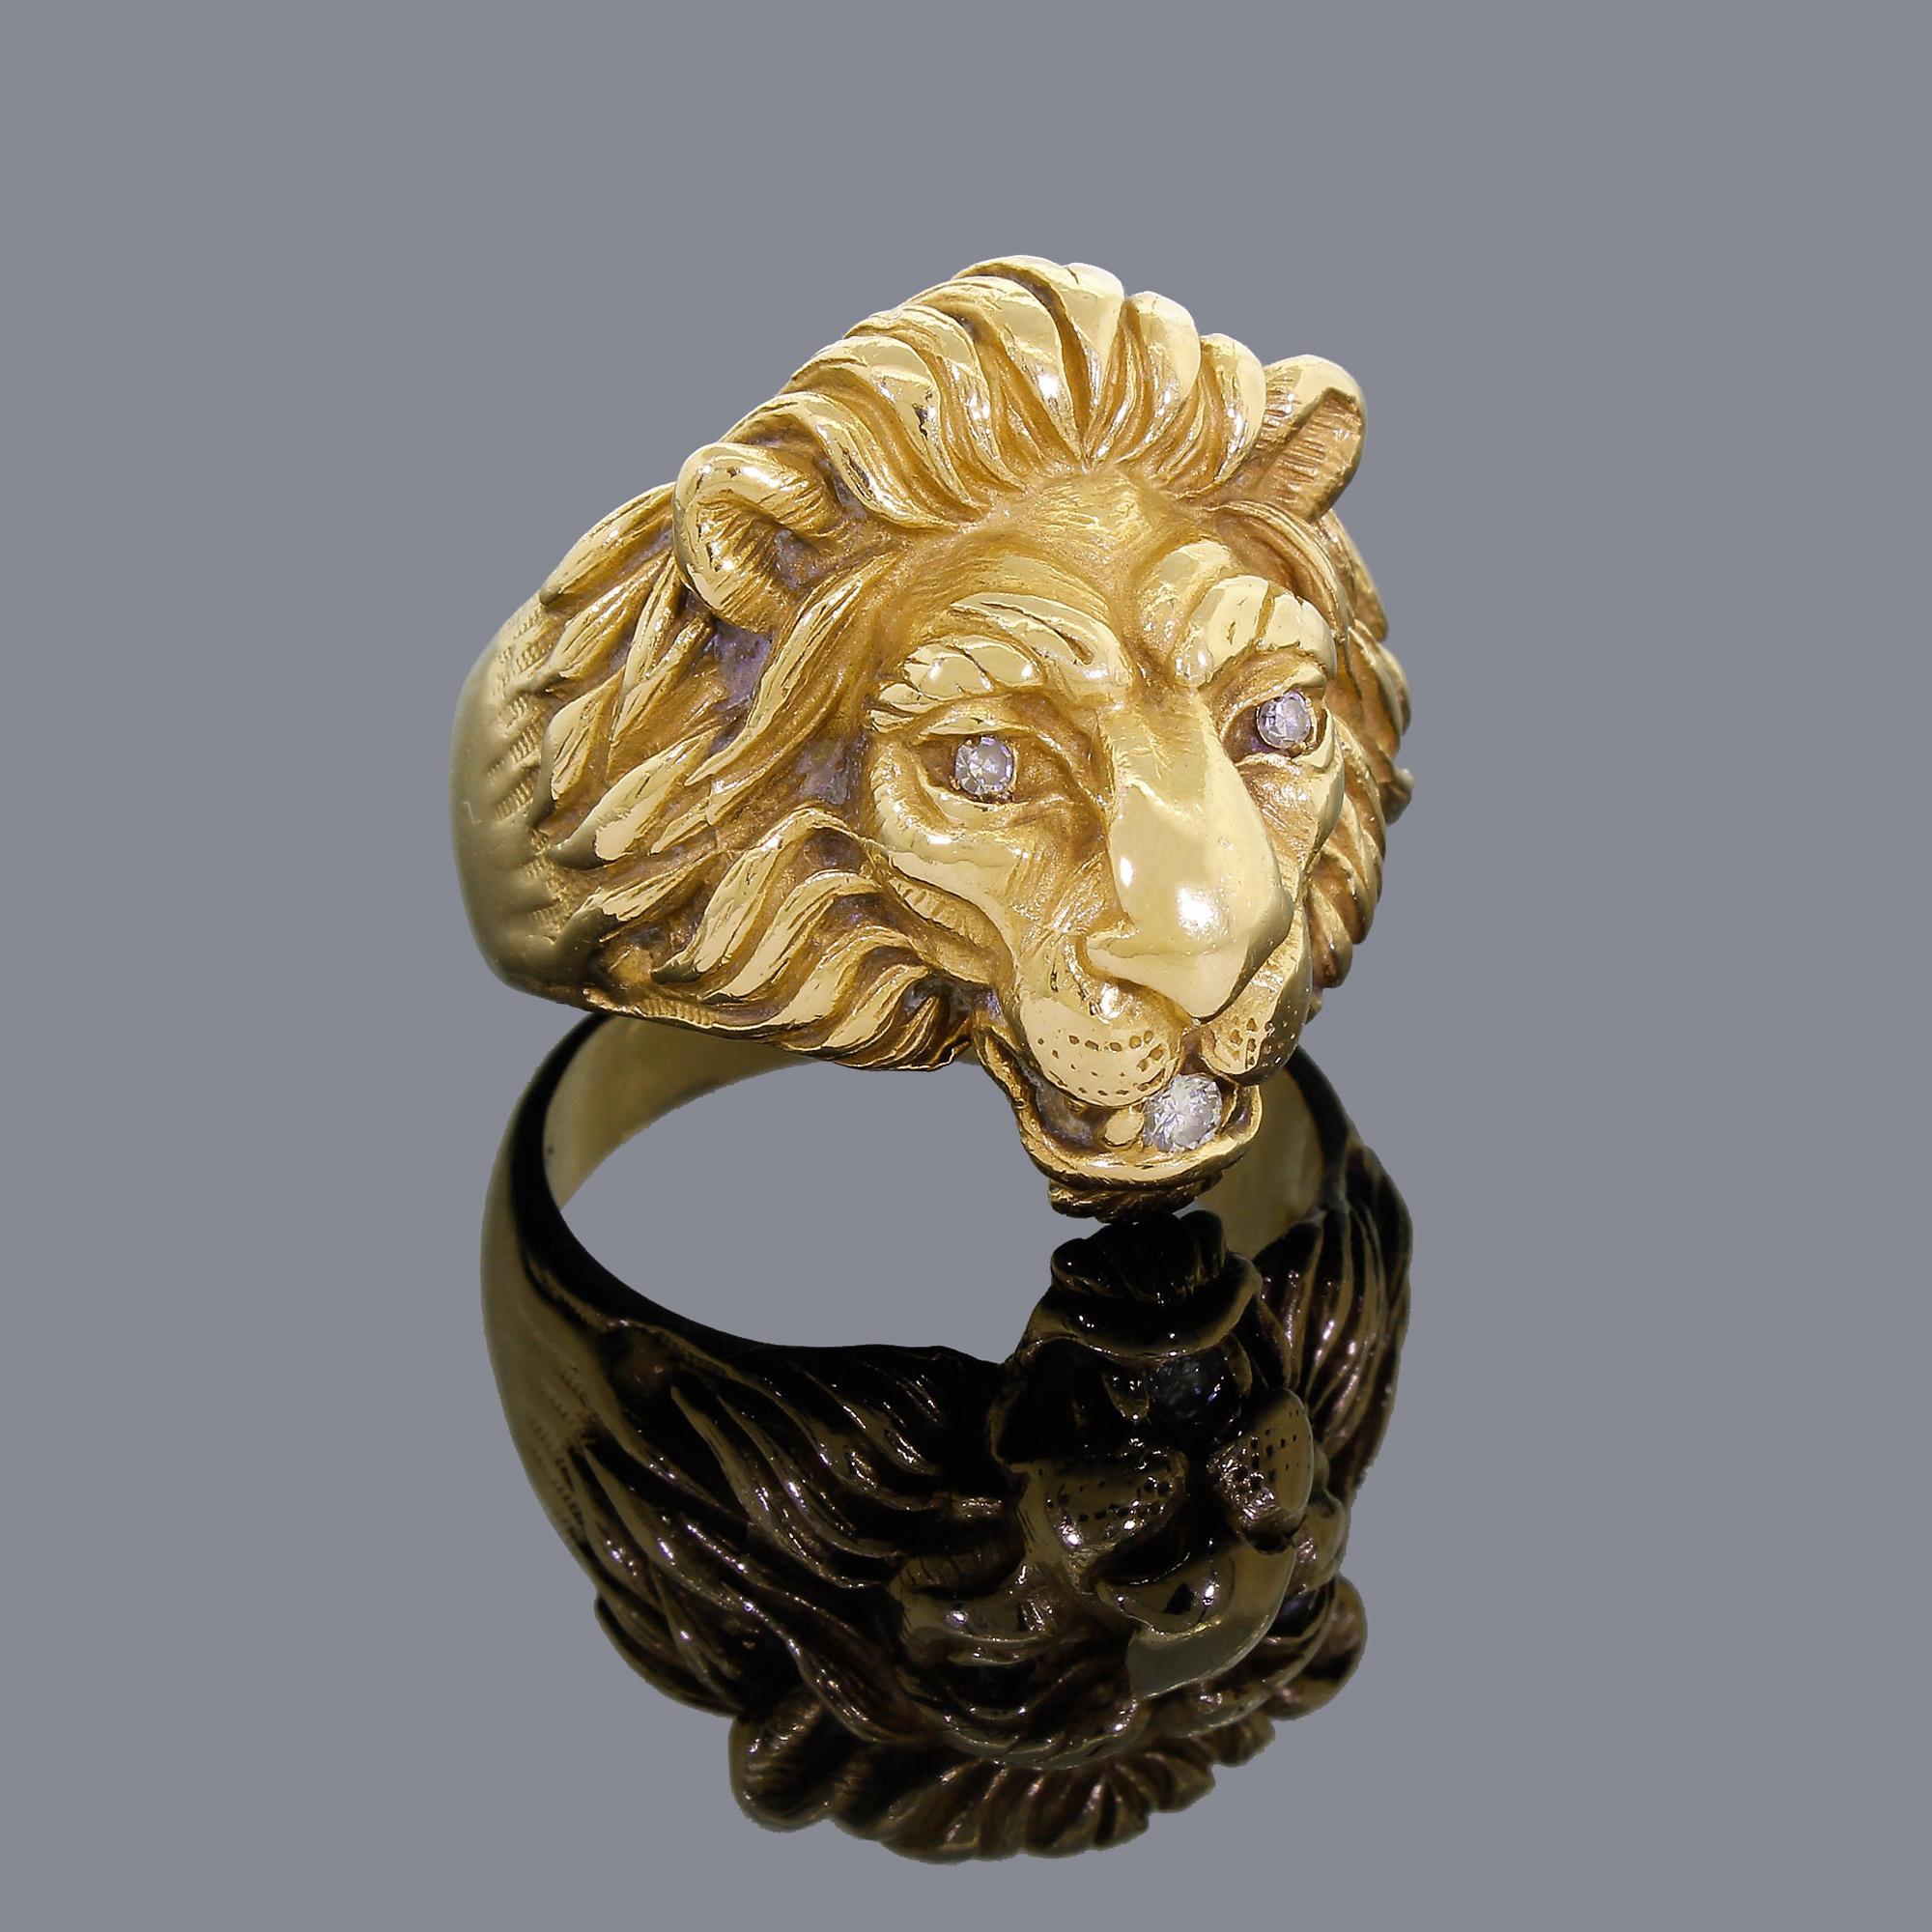 Very impressive vintage 14K solid gold lion ring that is magnificent in person - pictures just do not do him justice.
He is at least double the weight of the normal rings of this type; 17.60 grams of solid 14K yellow gold.
This style of ring was